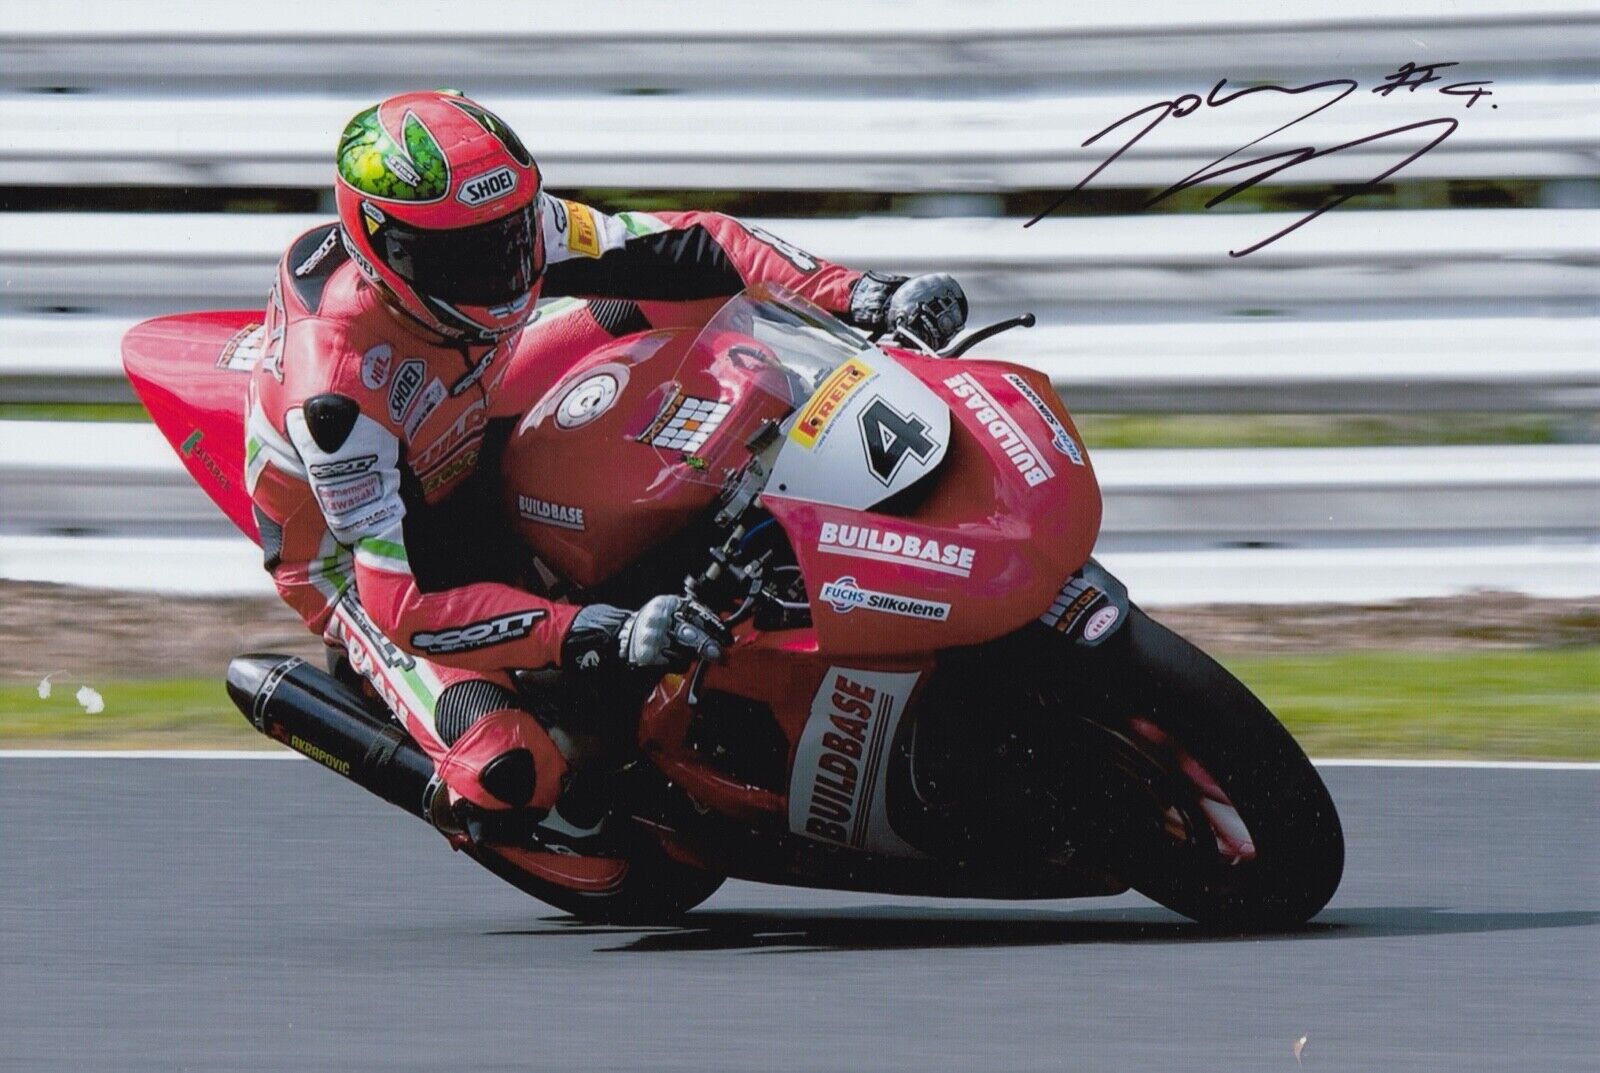 John Laverty Hand Signed 12x8 Photo Poster painting MotoGP Autograph BSB